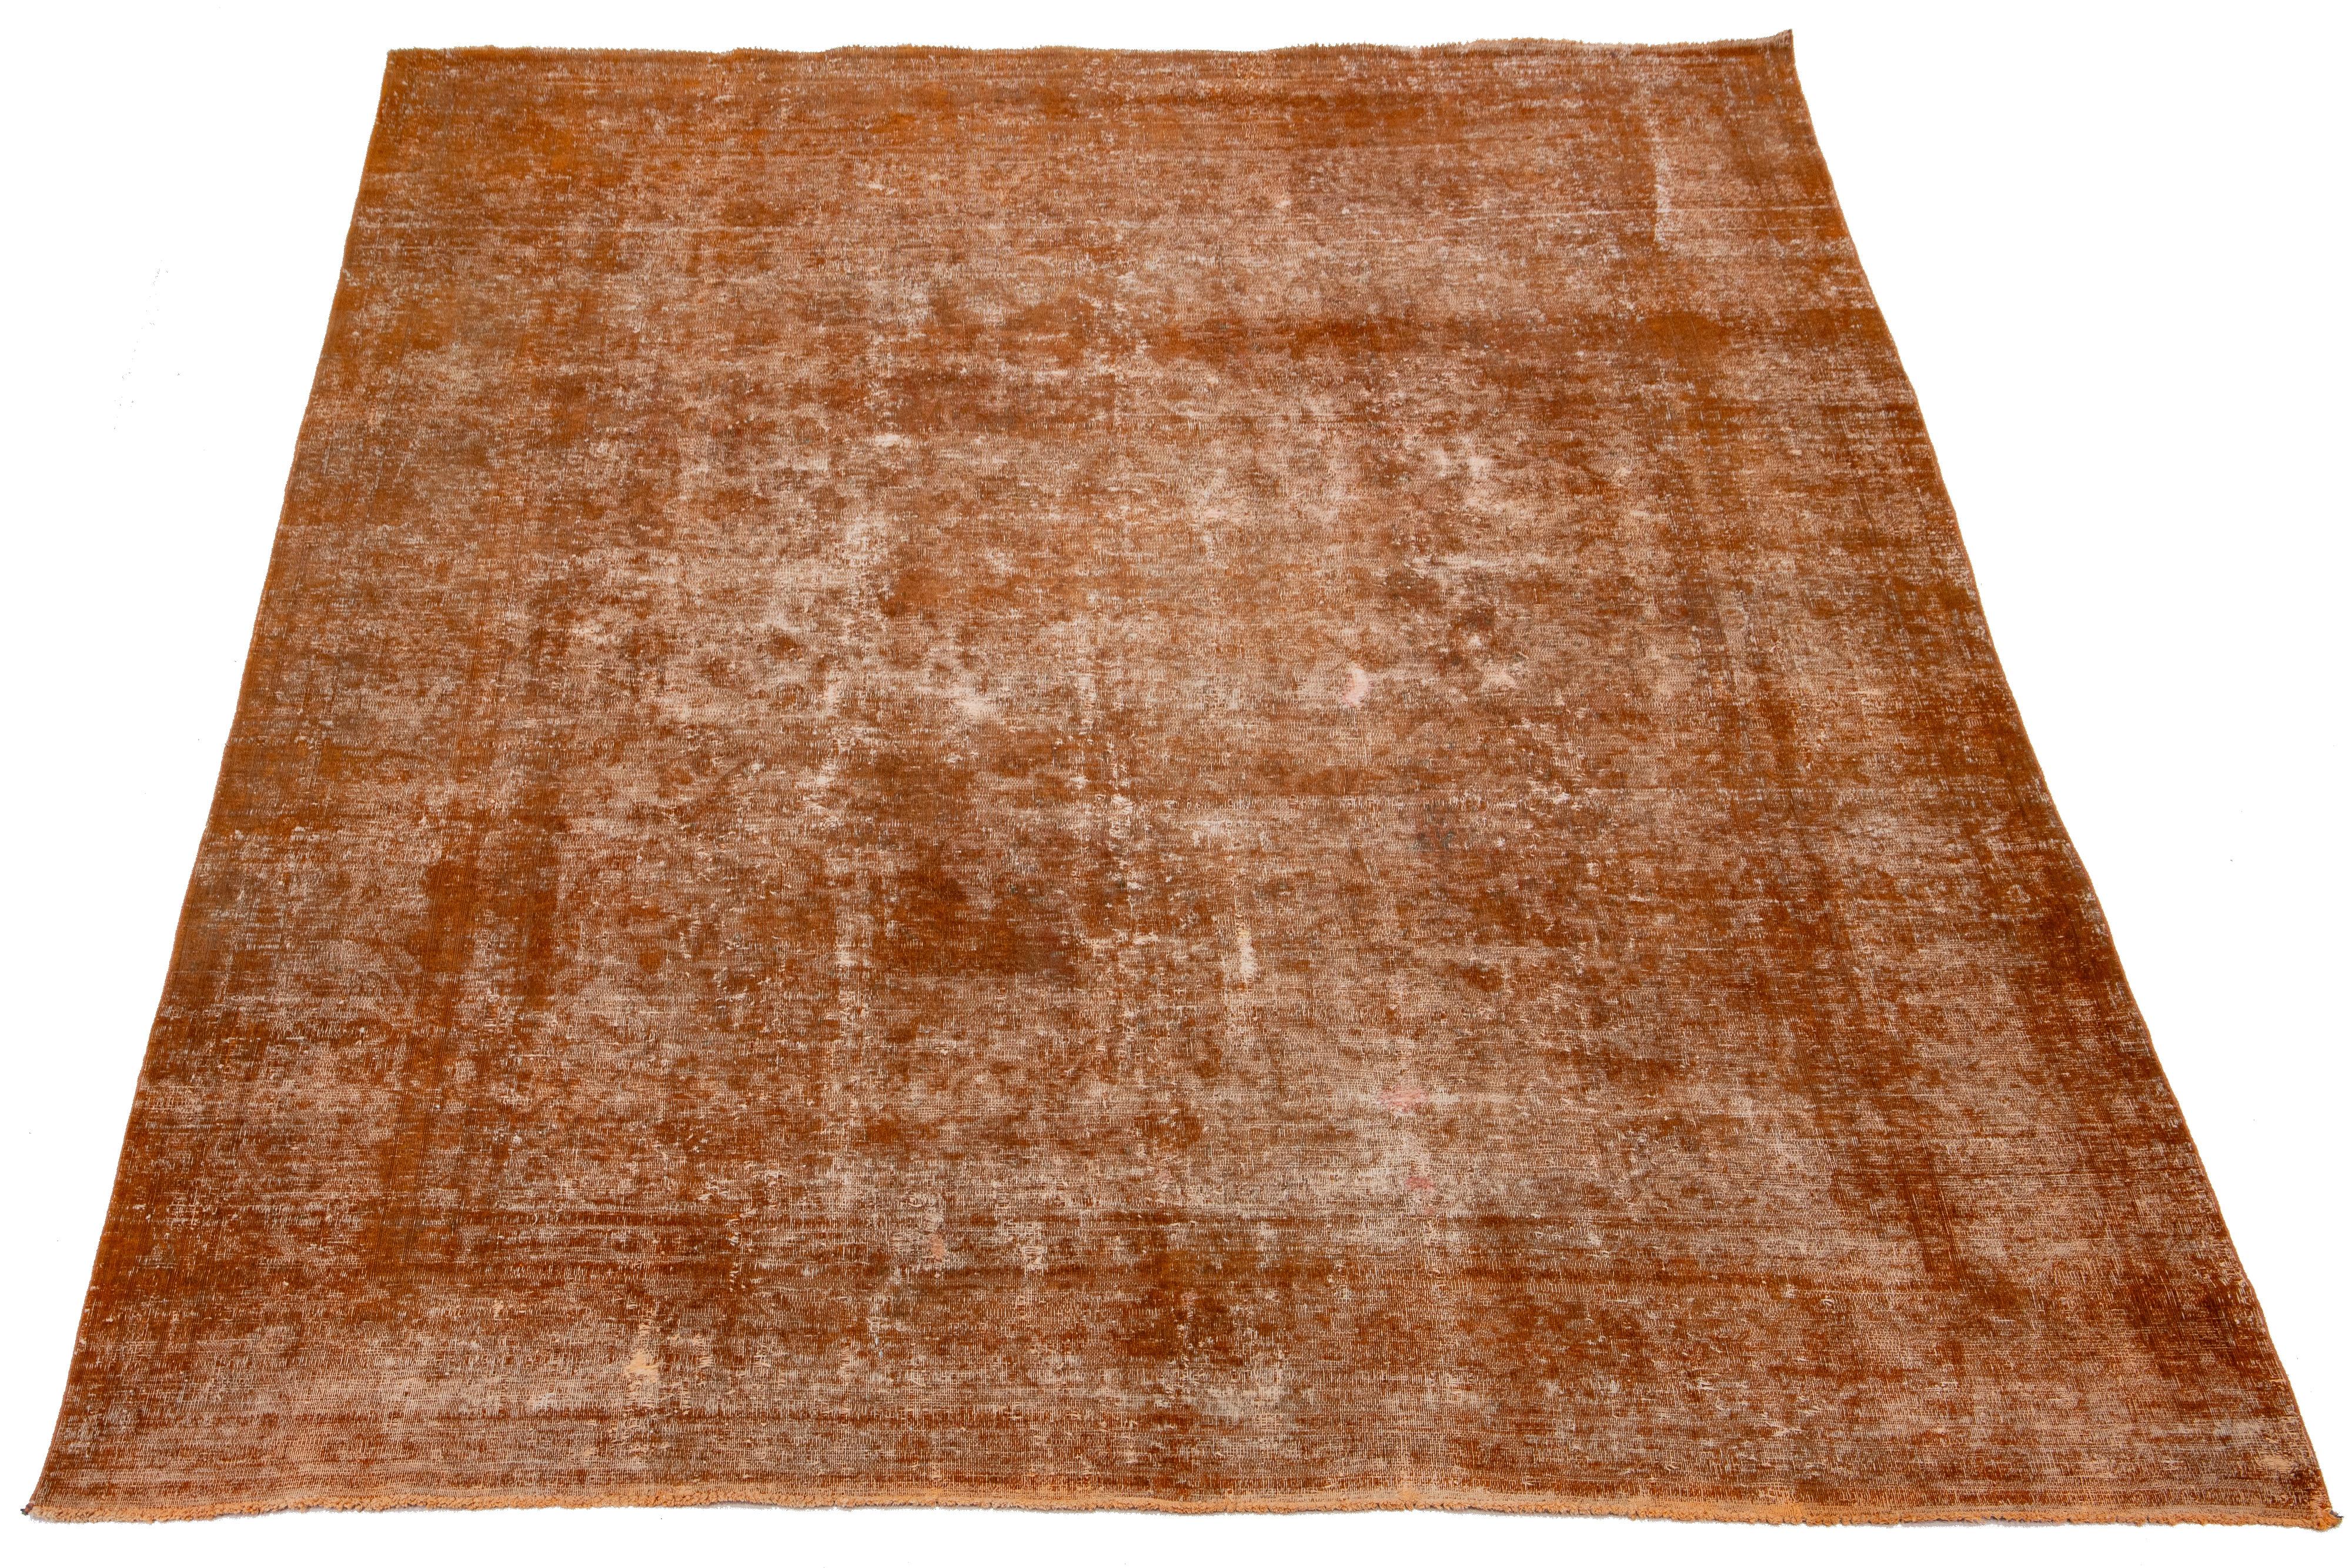 This antique orange Persian wool rug showcases an allover design with gray and brown accents.

This rug measures 9'5'' x 12'4